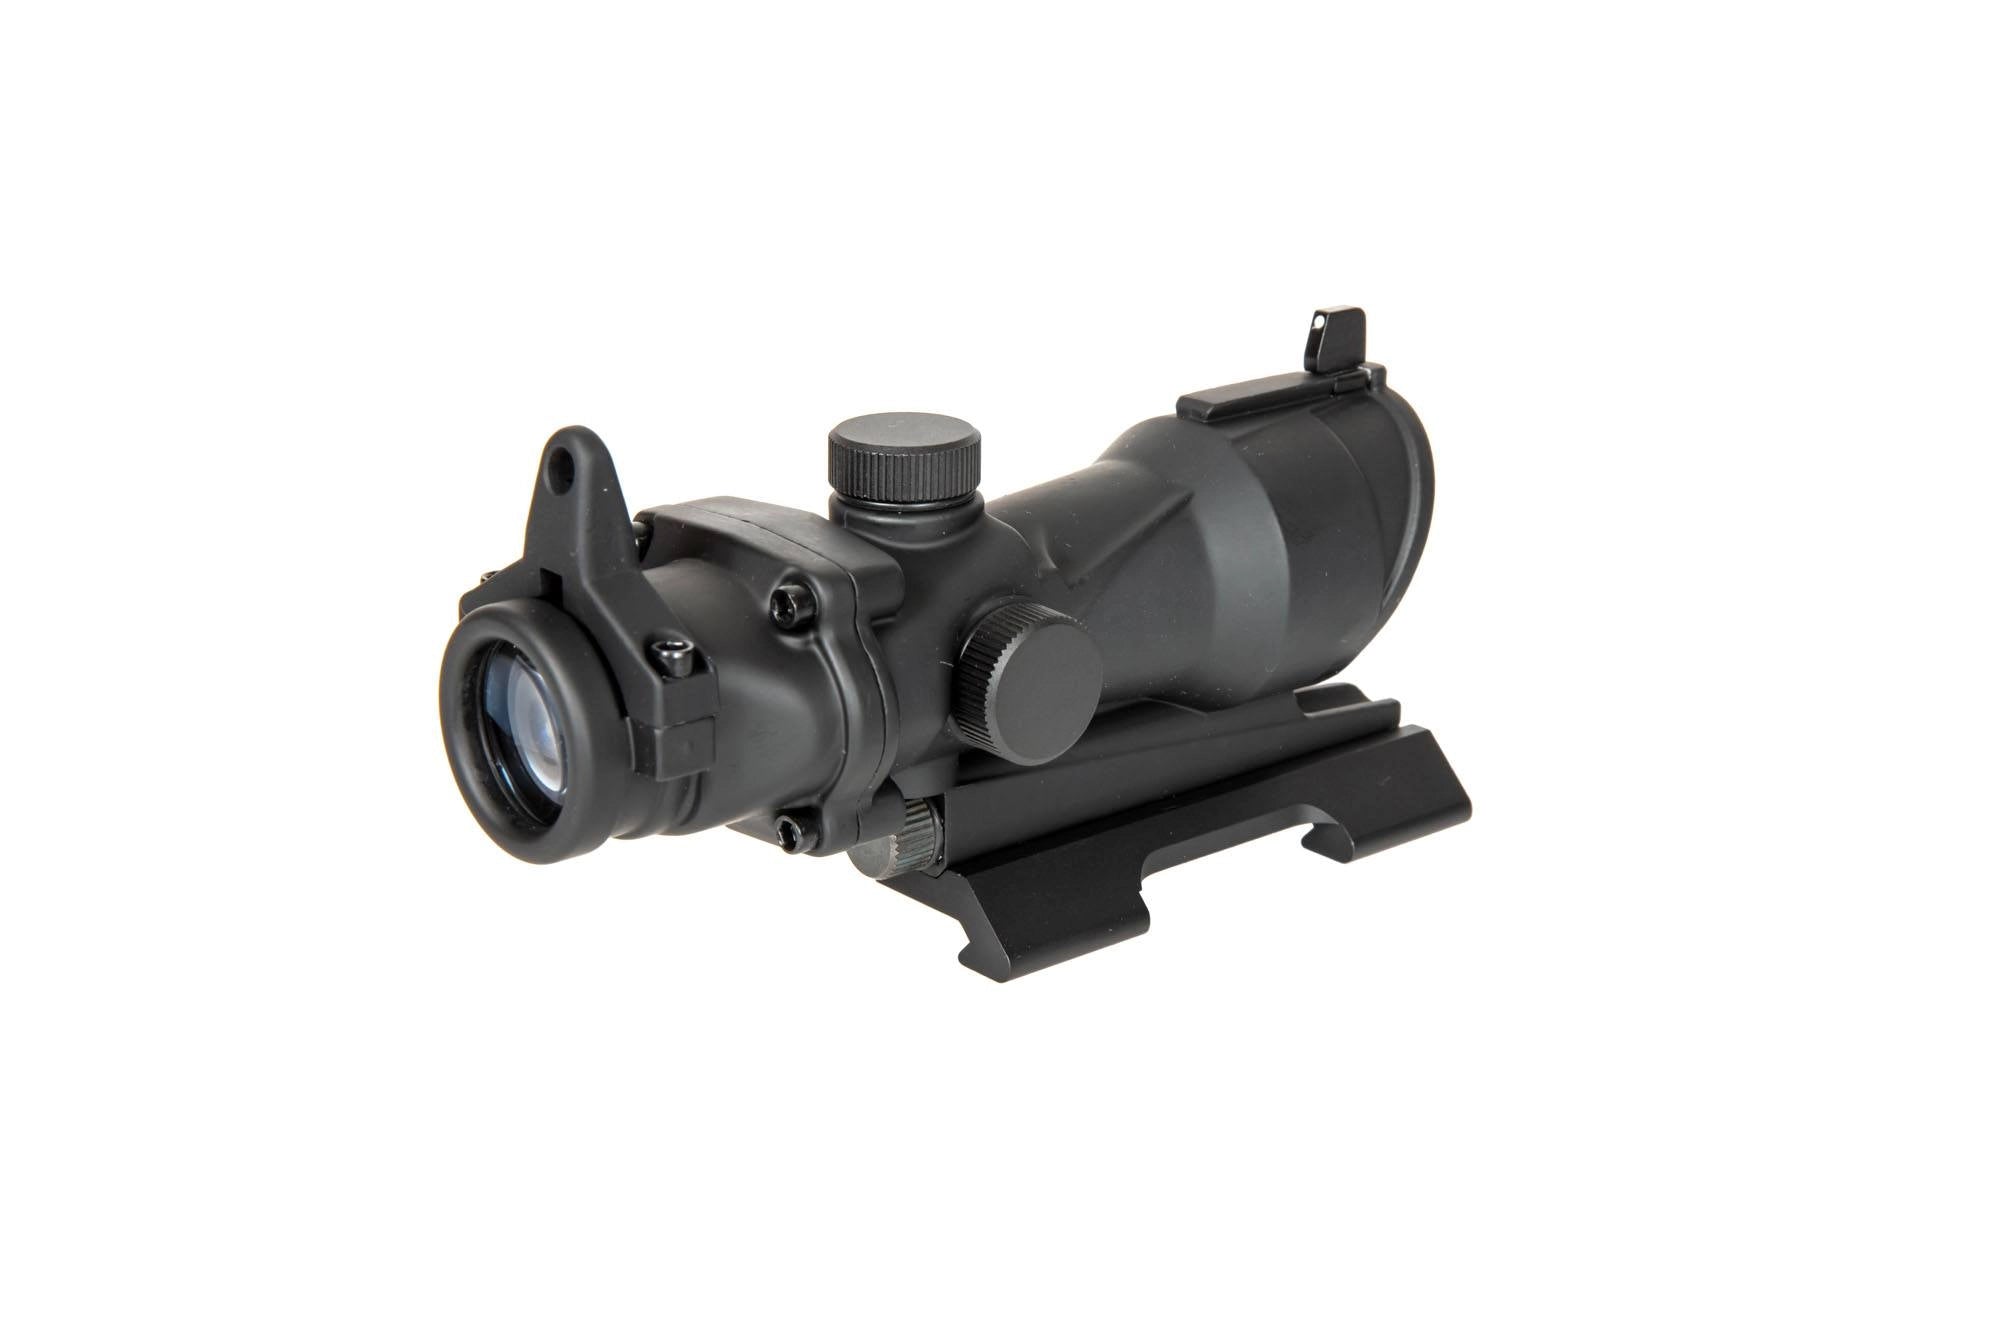 ACOG Style 4x32 Scope Replica with Killflash Cover, Lighting and QD V2 Mount - Black-1